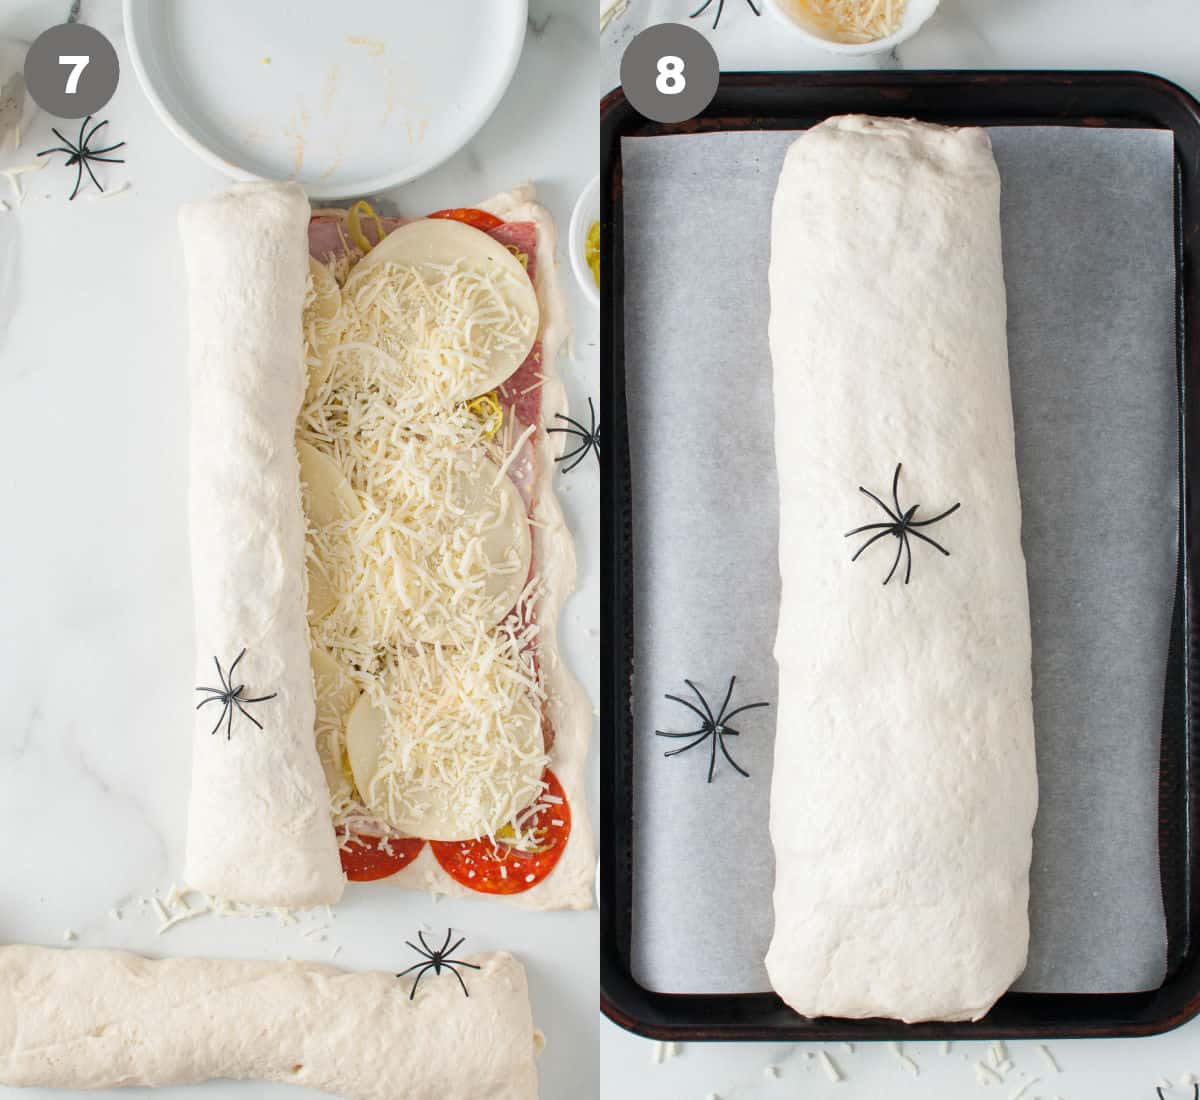 Pizza dough rolled up with filling and placed on a baking sheet.